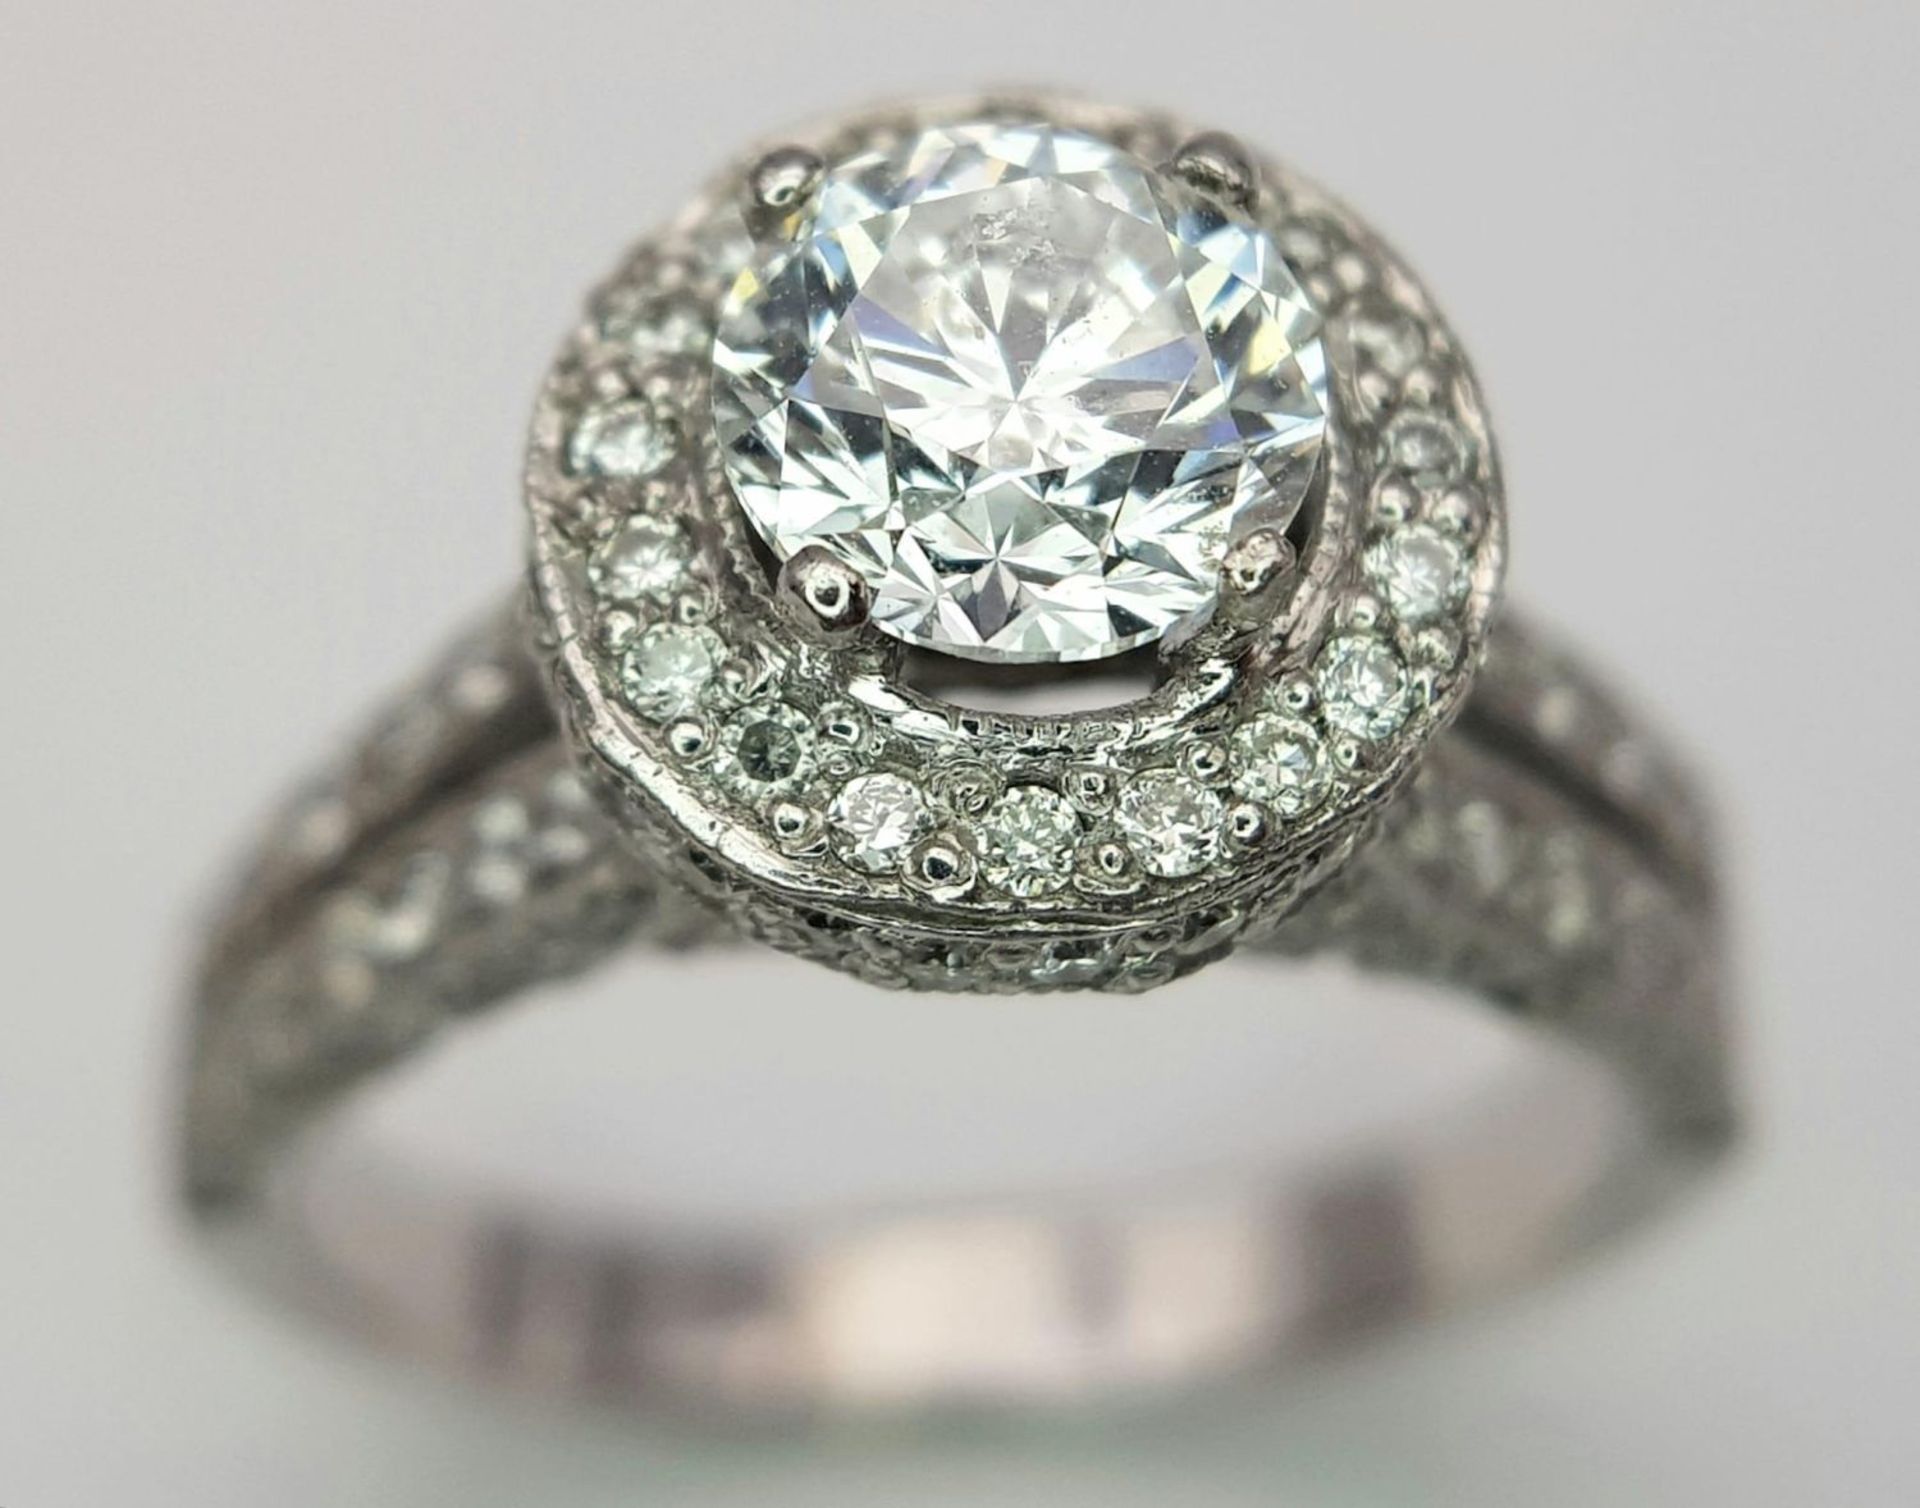 An 18 K white gold ring with a brilliant cut diamond (1.01 carats) surrounded by diamonds on the top - Image 19 of 22